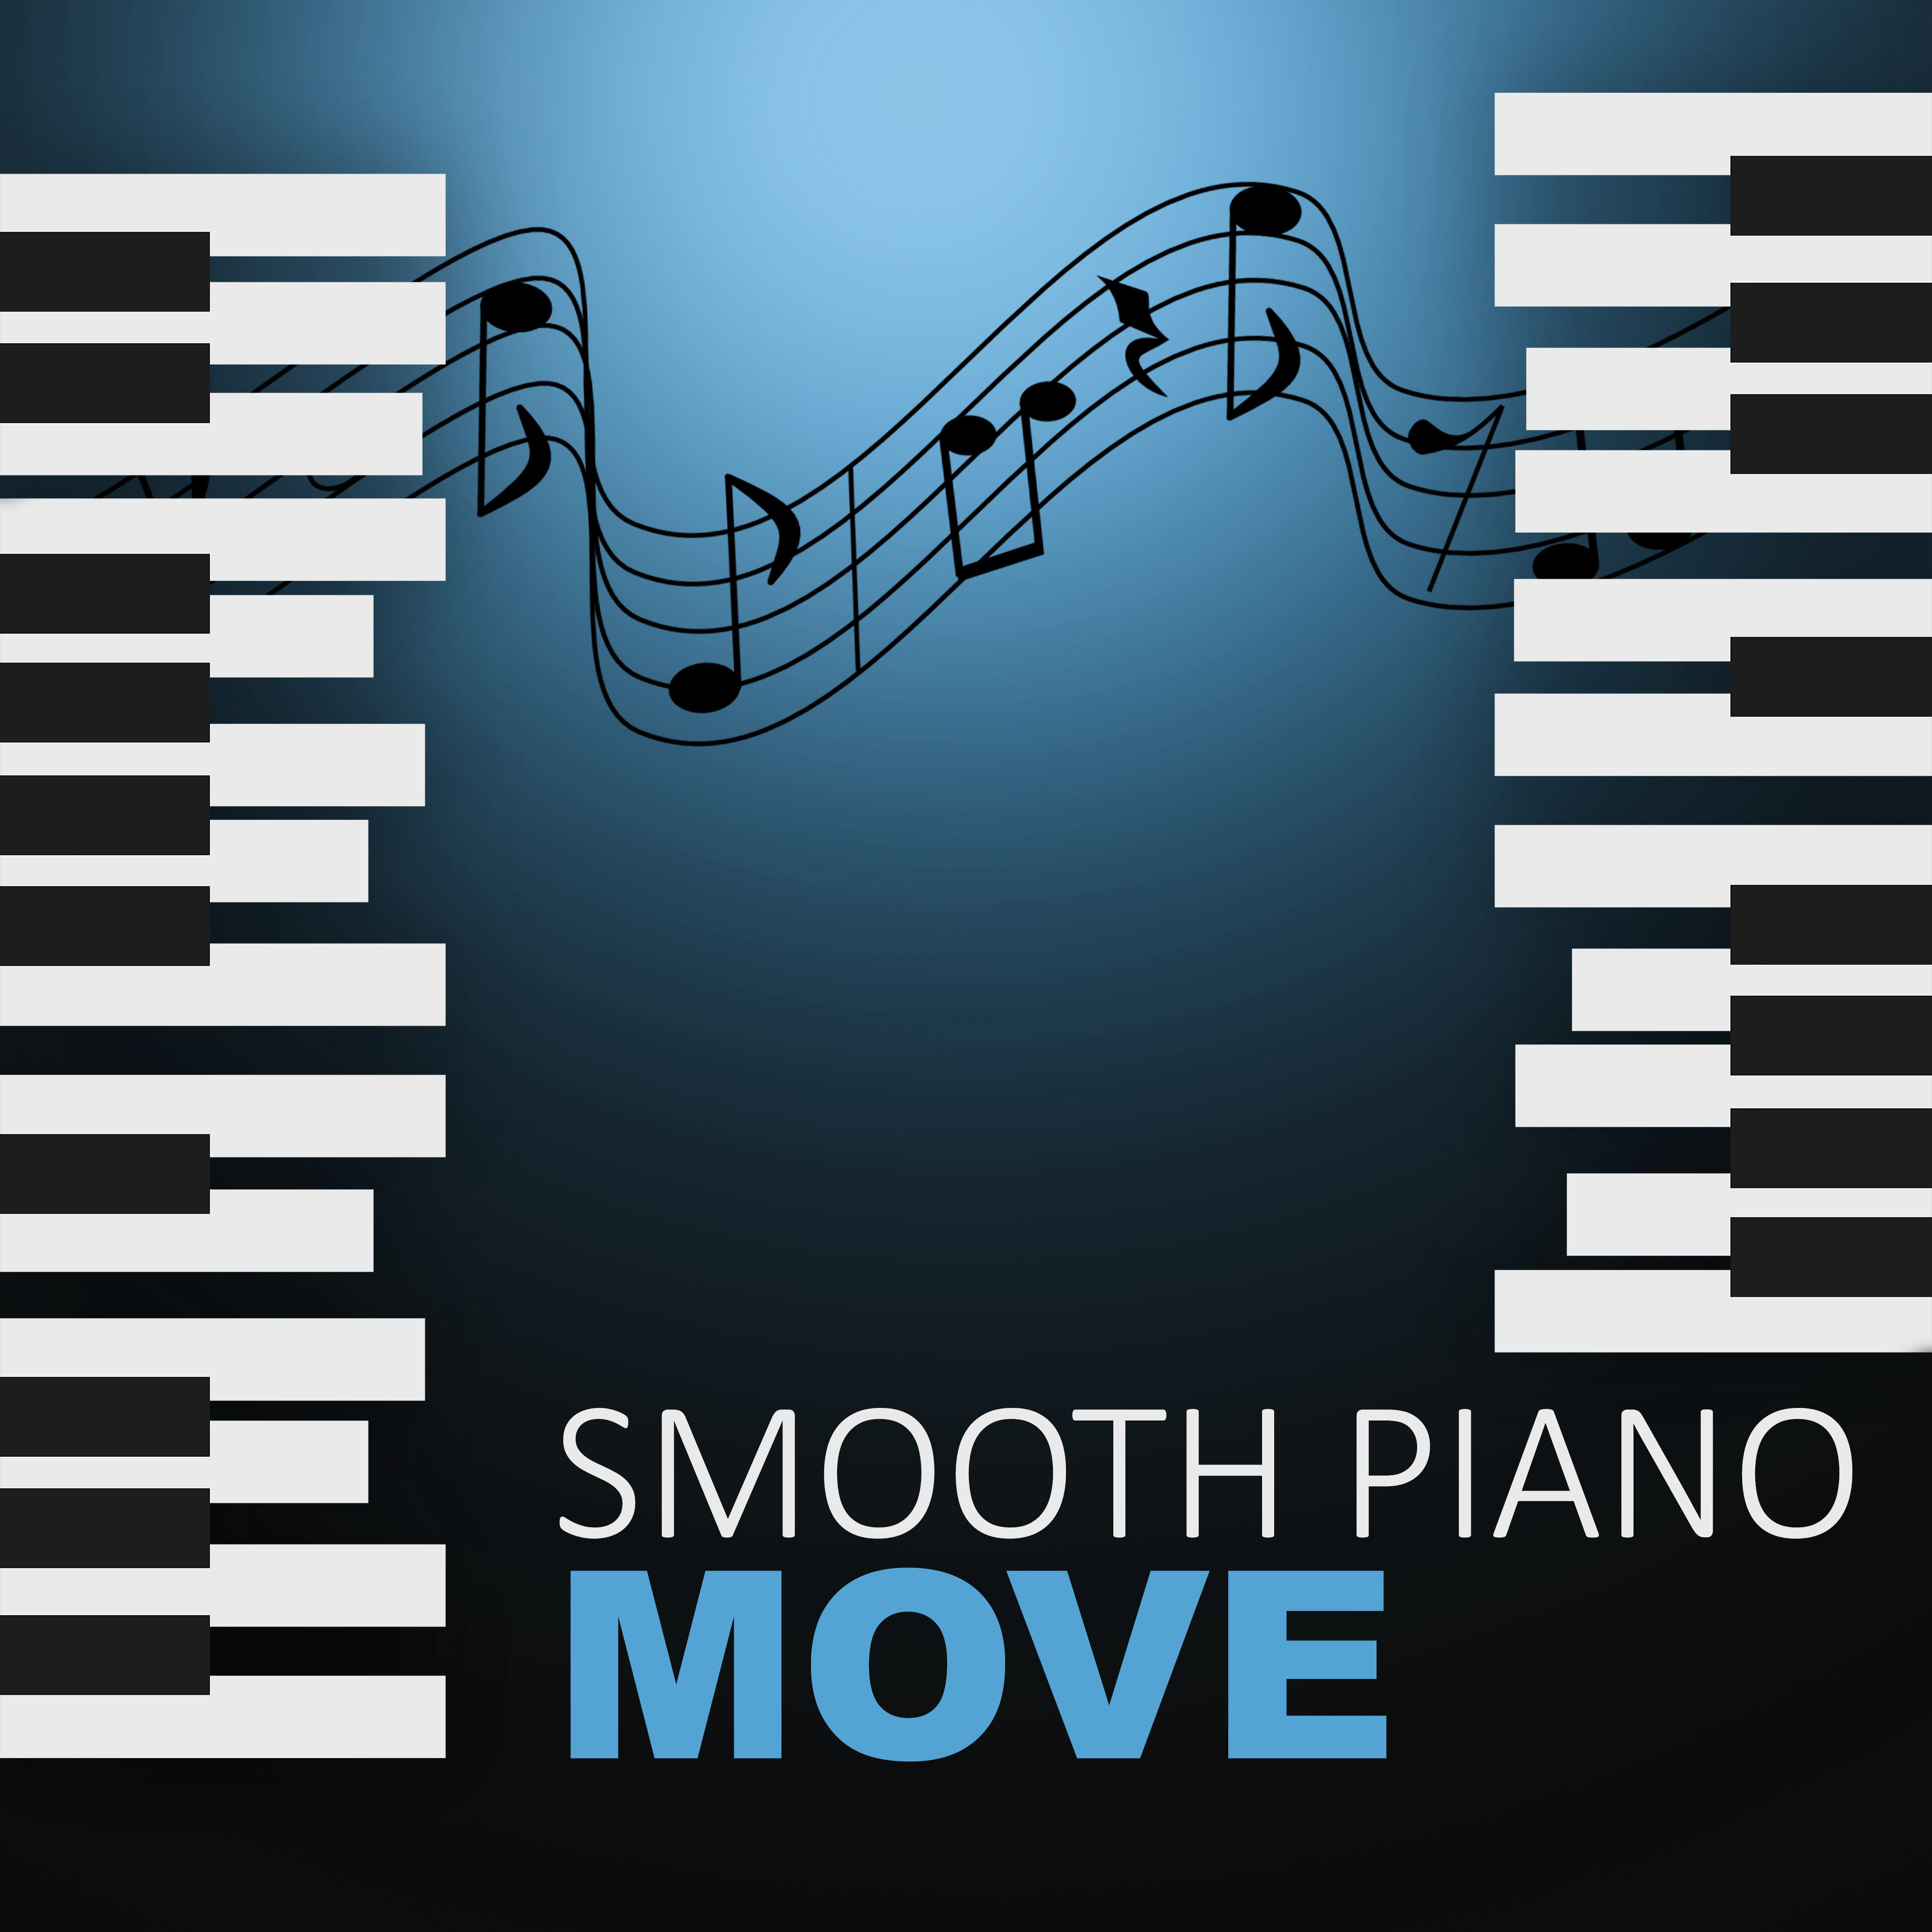 Smooth Piano Move  Soft Piano Jazz, Easy Listening, Best Collection of Jazz Music, Mellow Jazz, Calming Background Jazz